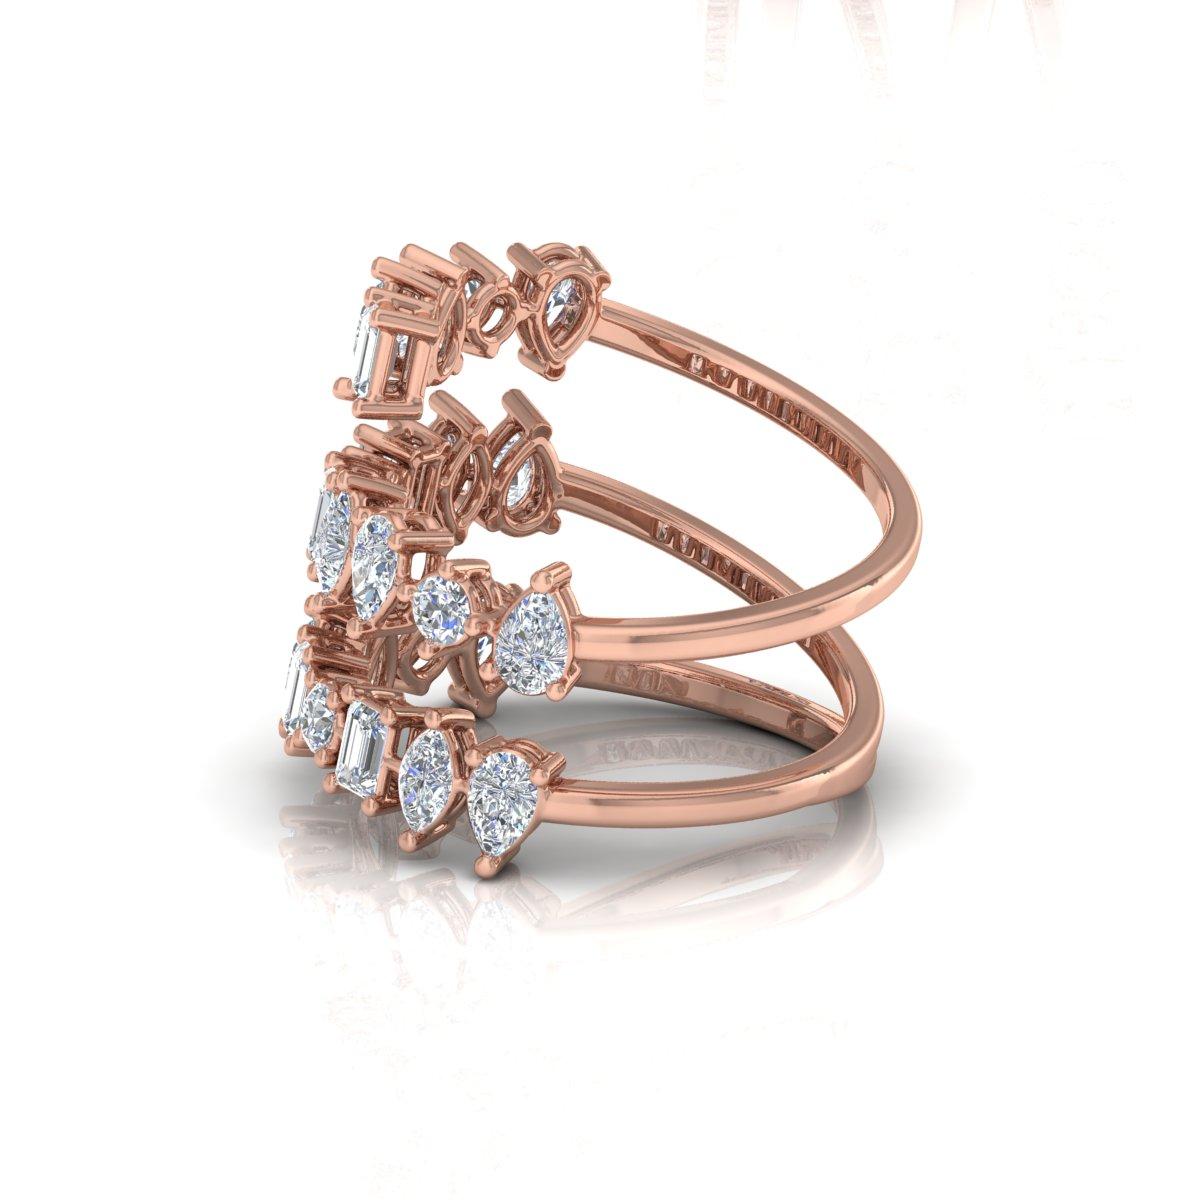 For Sale:  2.70 Carat Pear Baguette Diamond Wrap Ring Solid 18k Rose Gold Handmade Jewelry 8